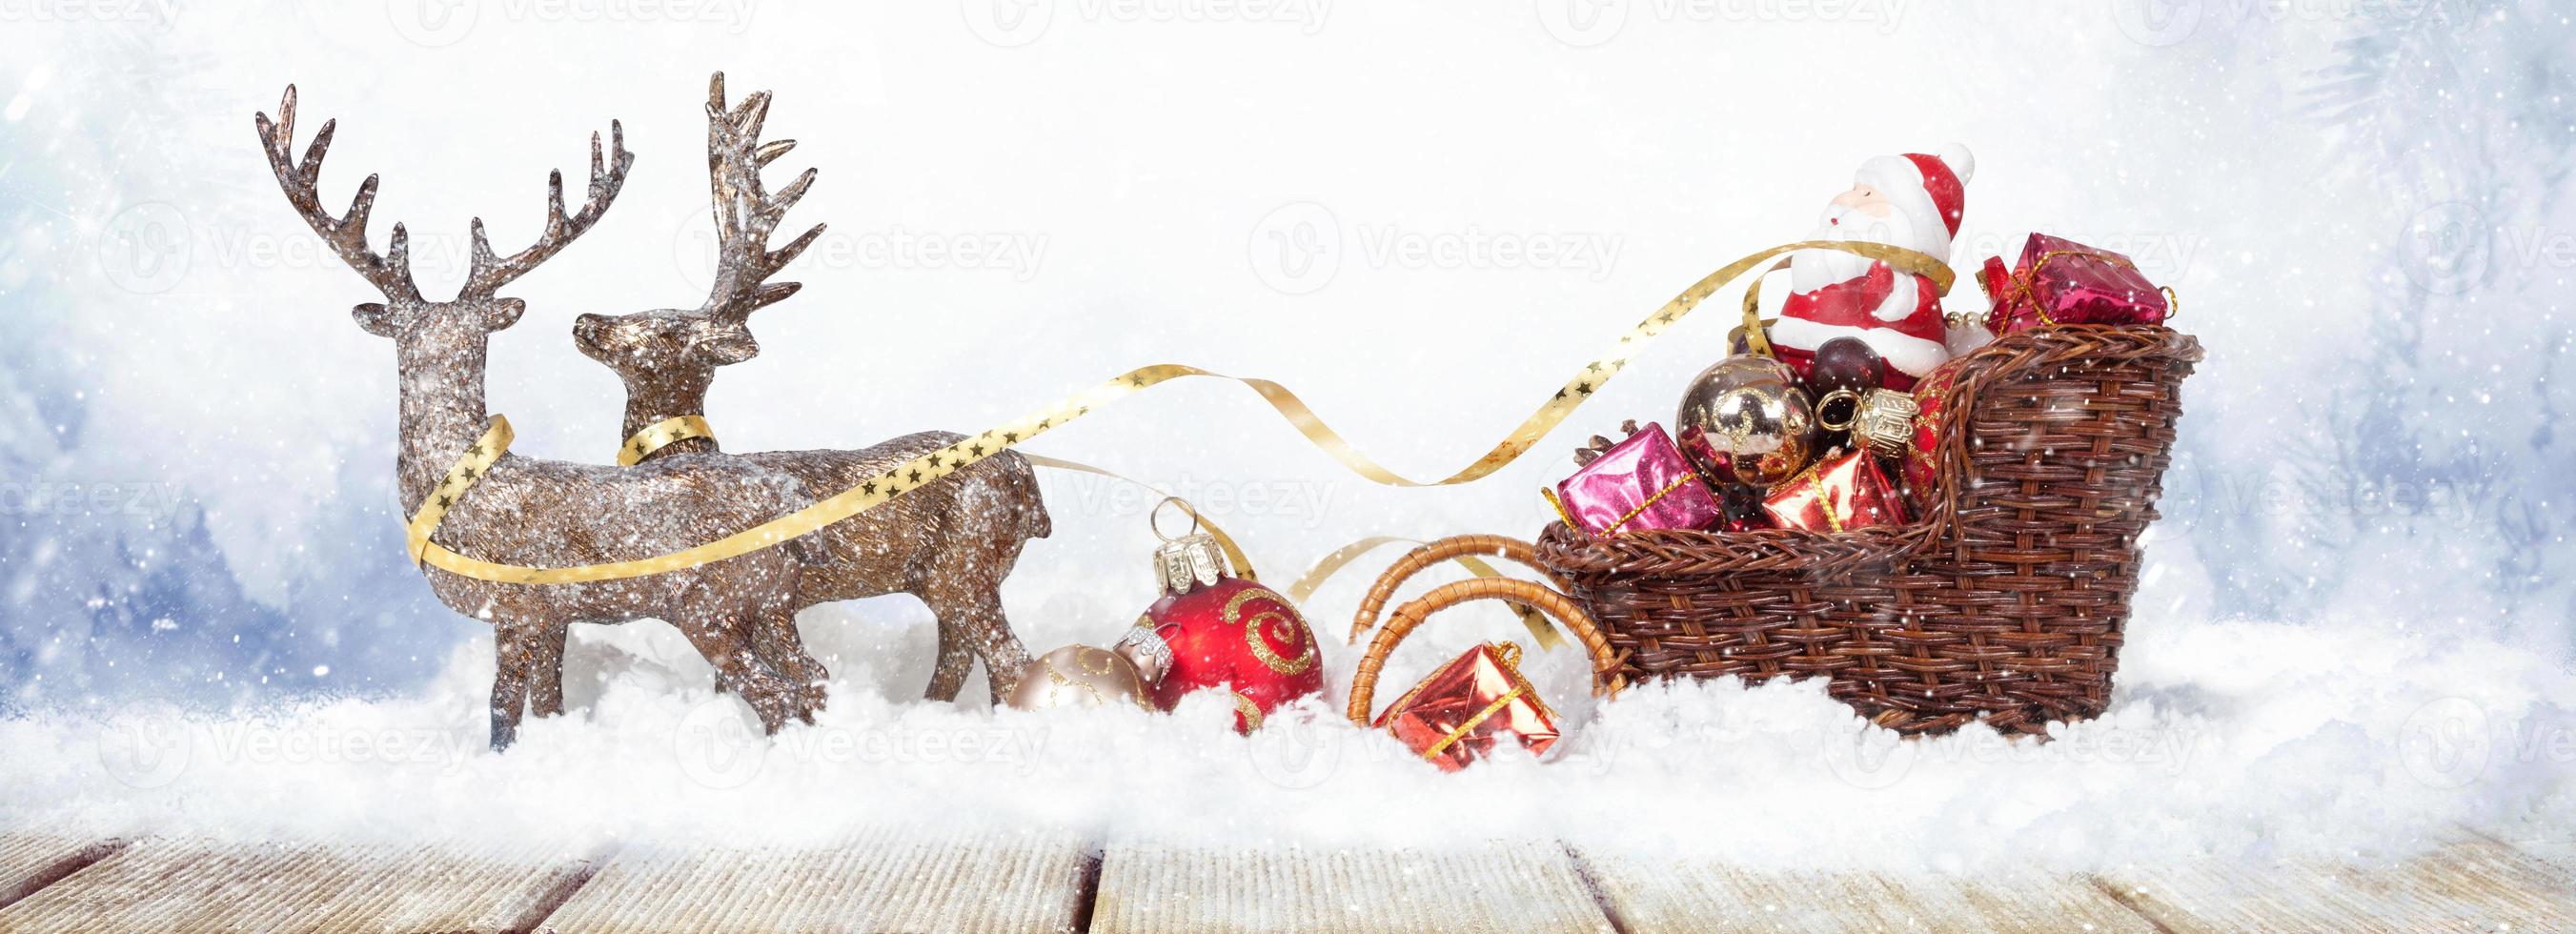 Christmas holidays scenic background with wooden table and christmas decoration. photo